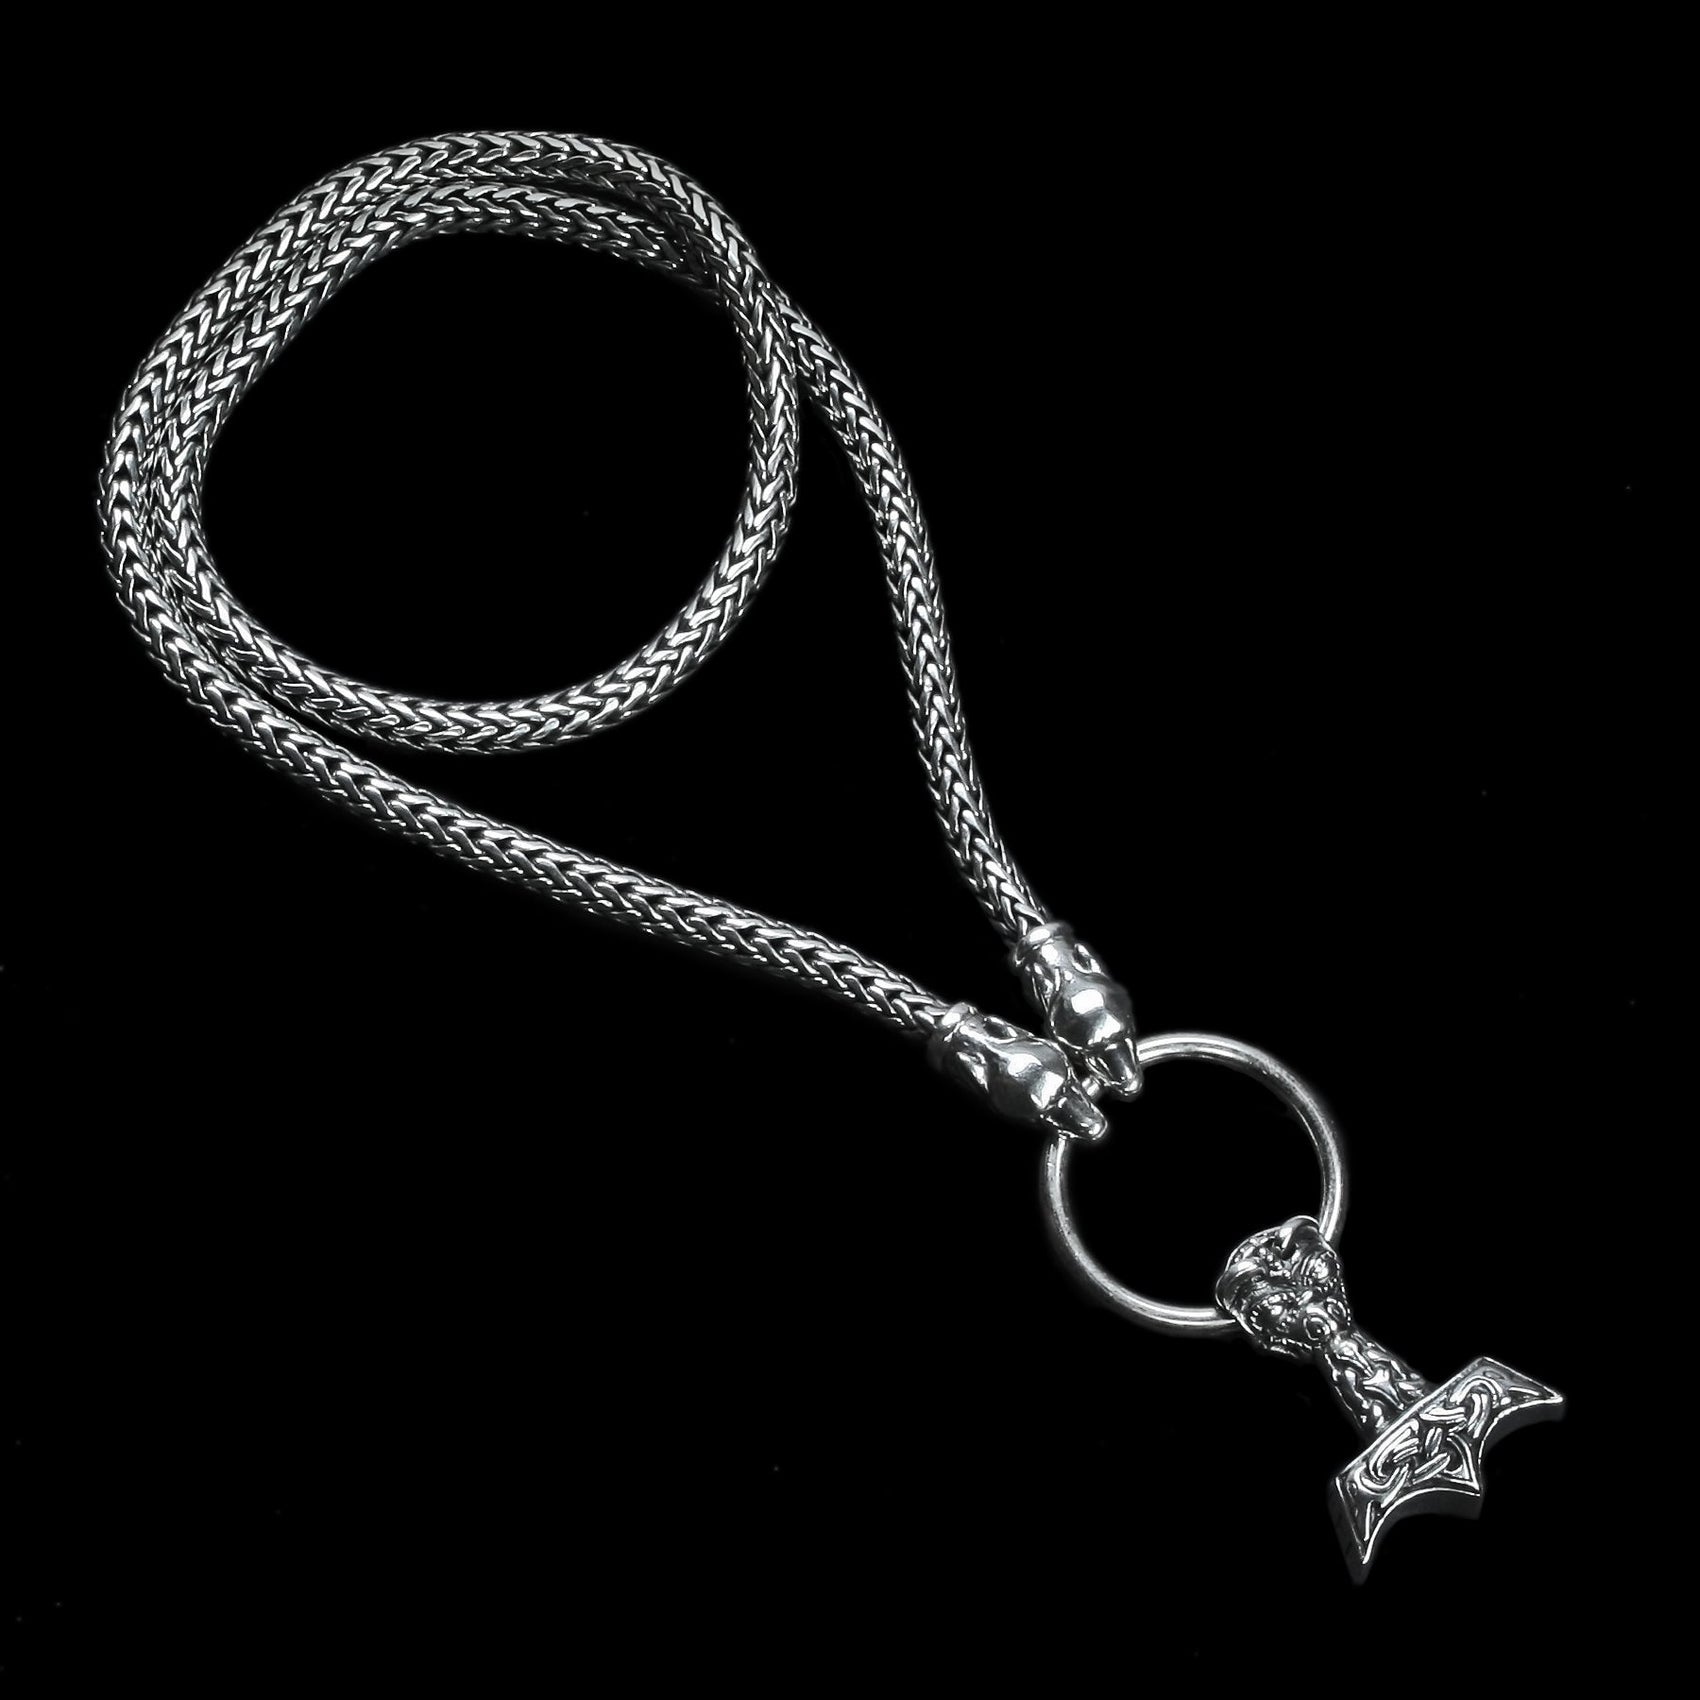 5mm Thick Silver Thor's Hammer Viking Necklace with Wolf Heads